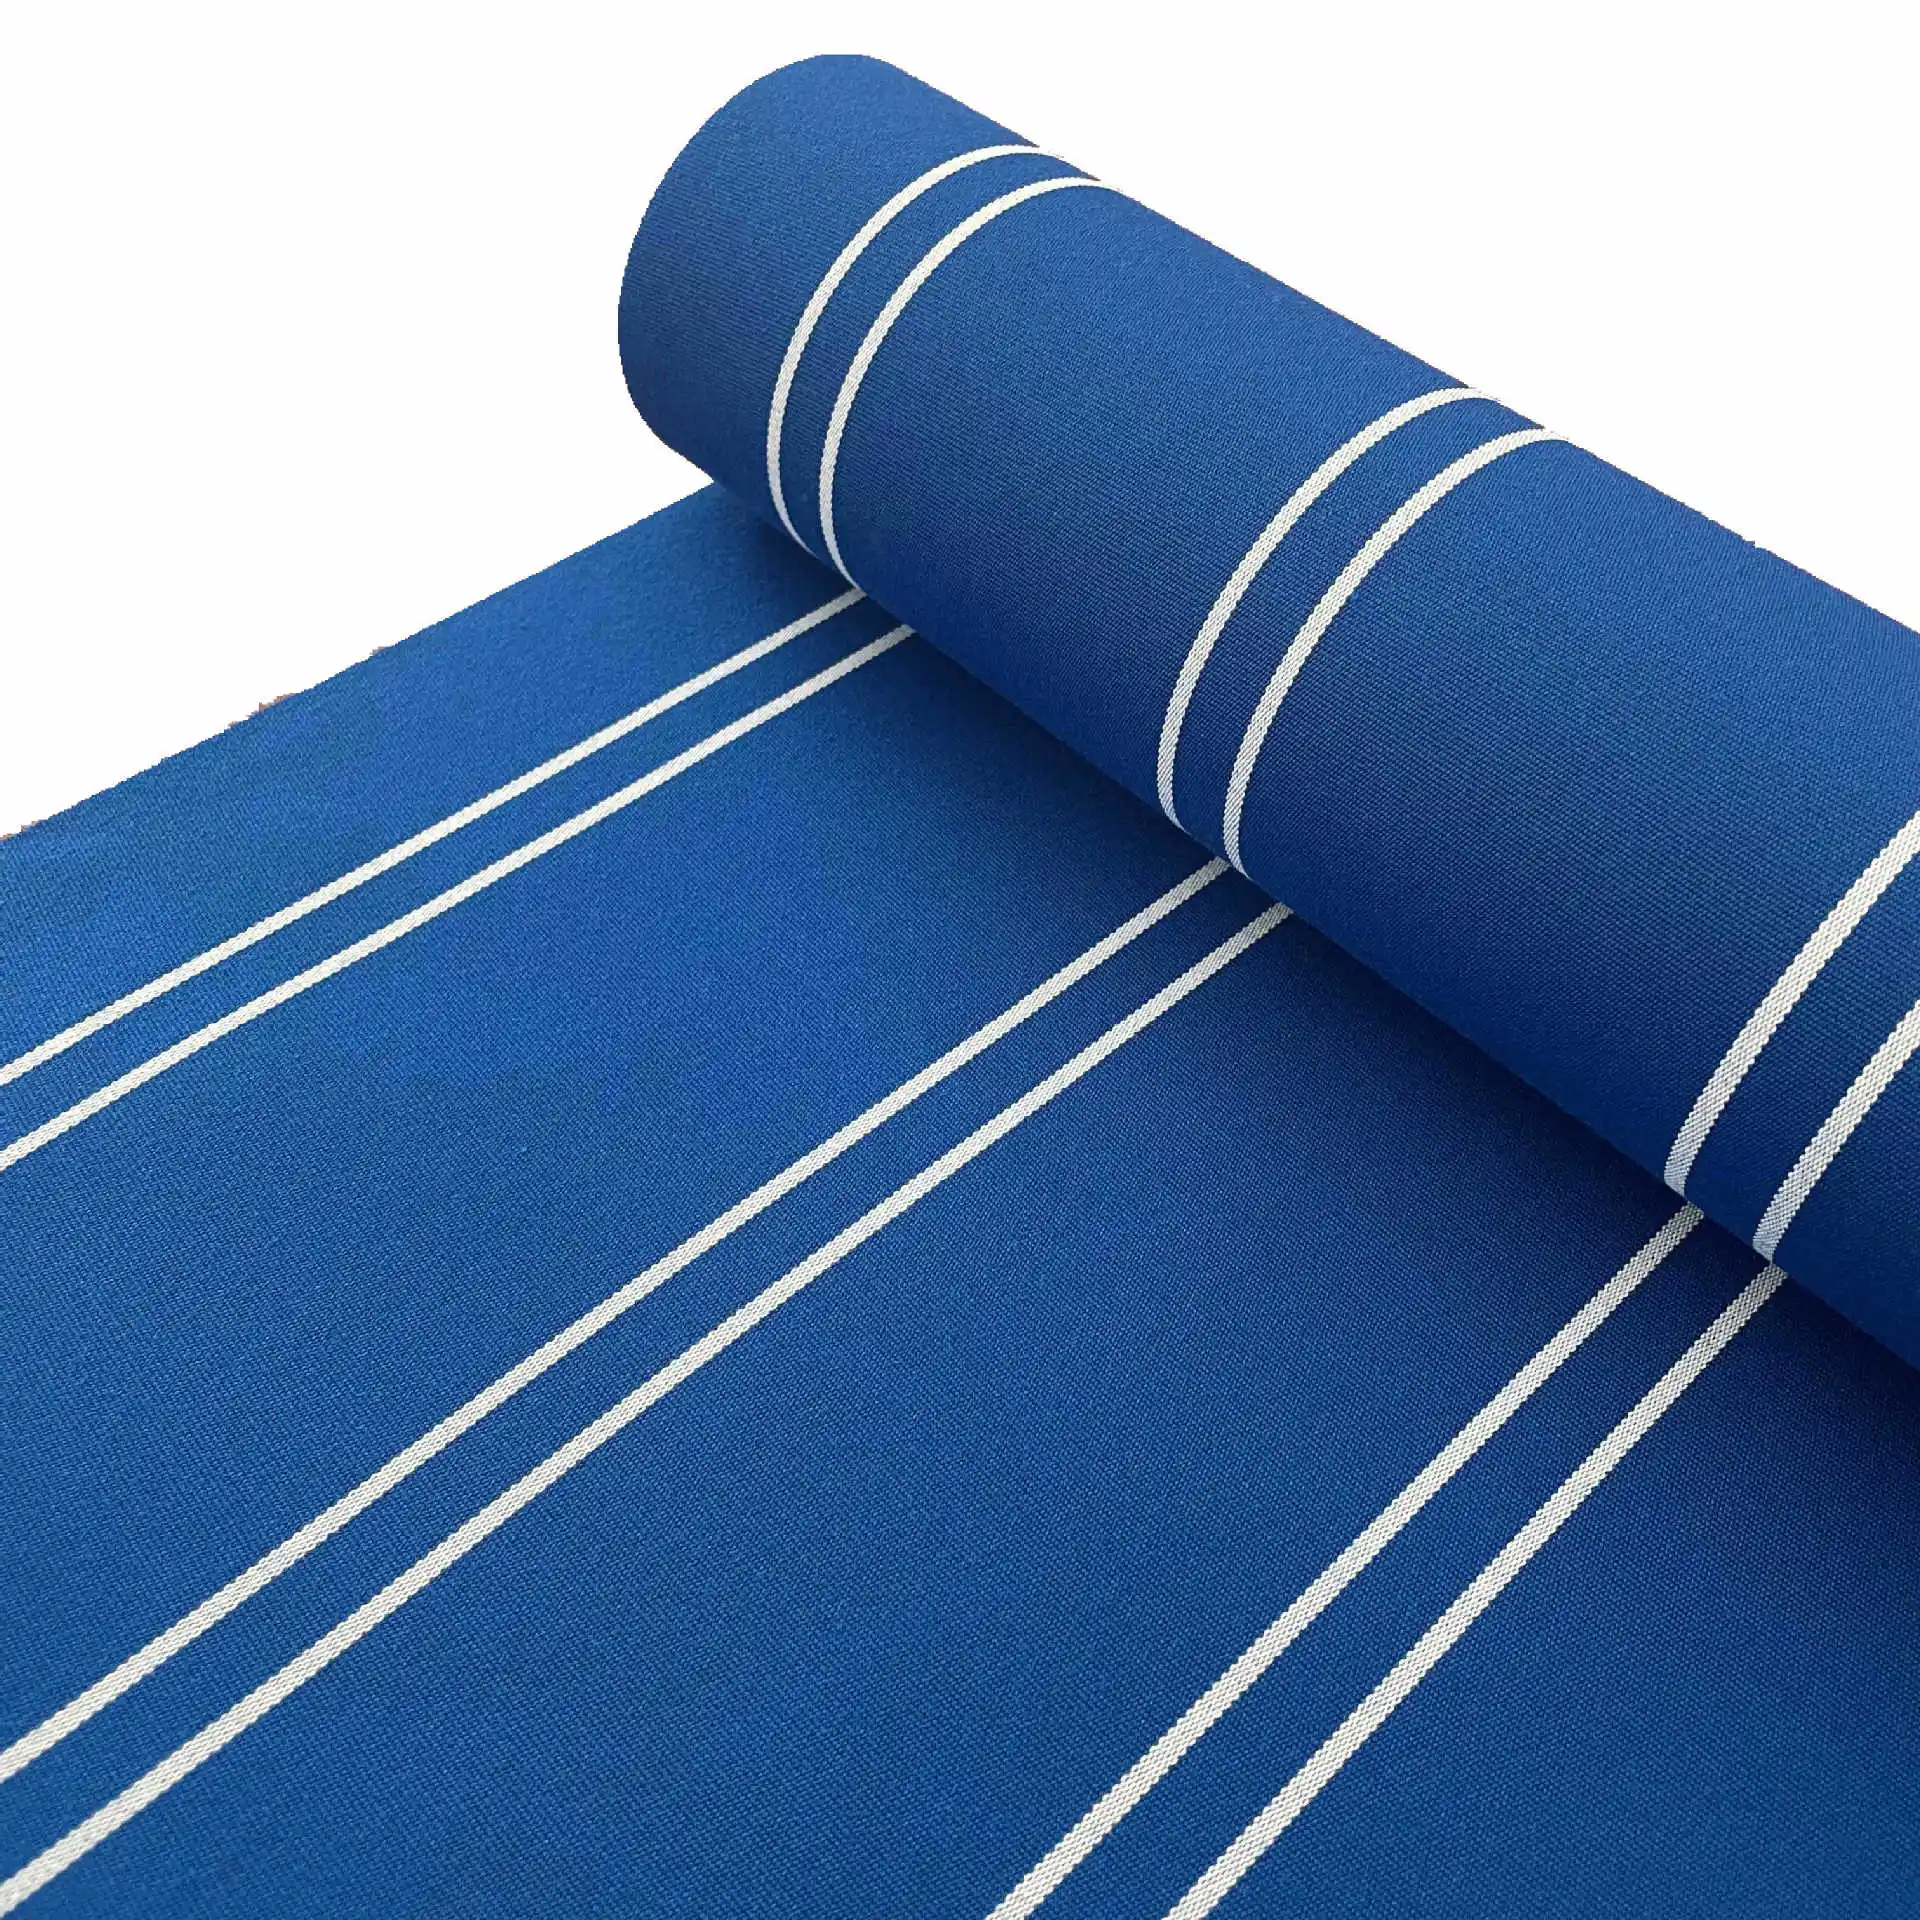 Outdoor fabric printing acrylic fabric price 600d solution dyed acrylic fabric blue